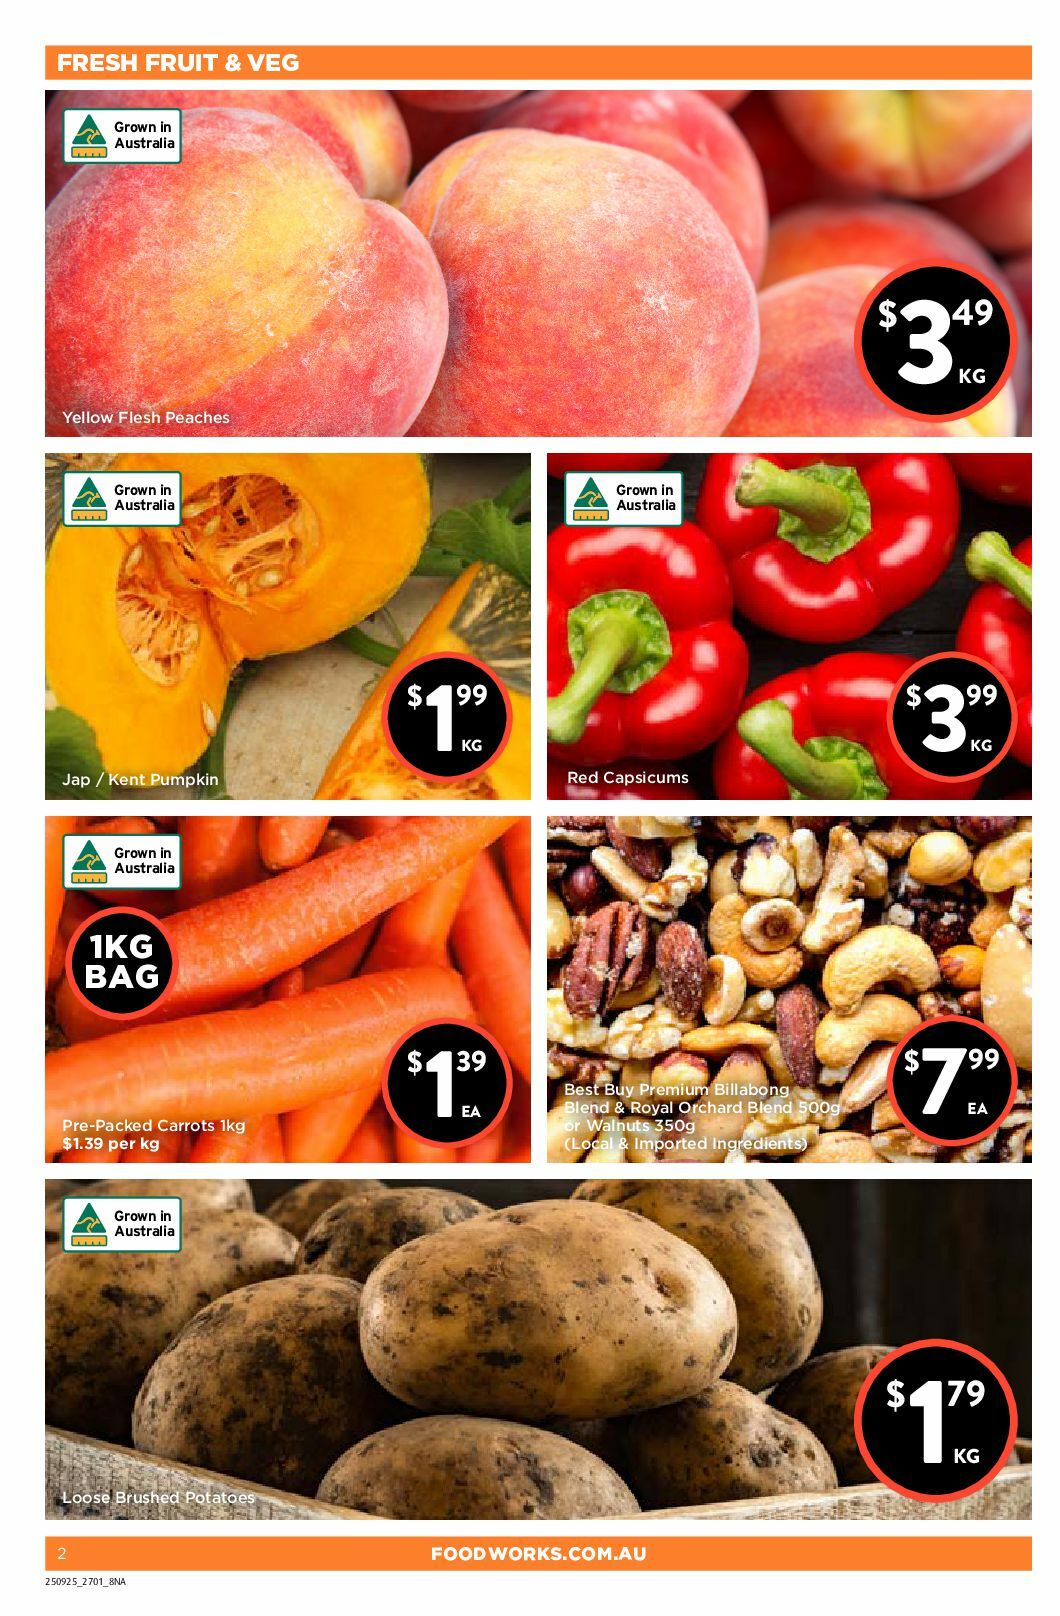 FoodWorks Catalogues from 27 January